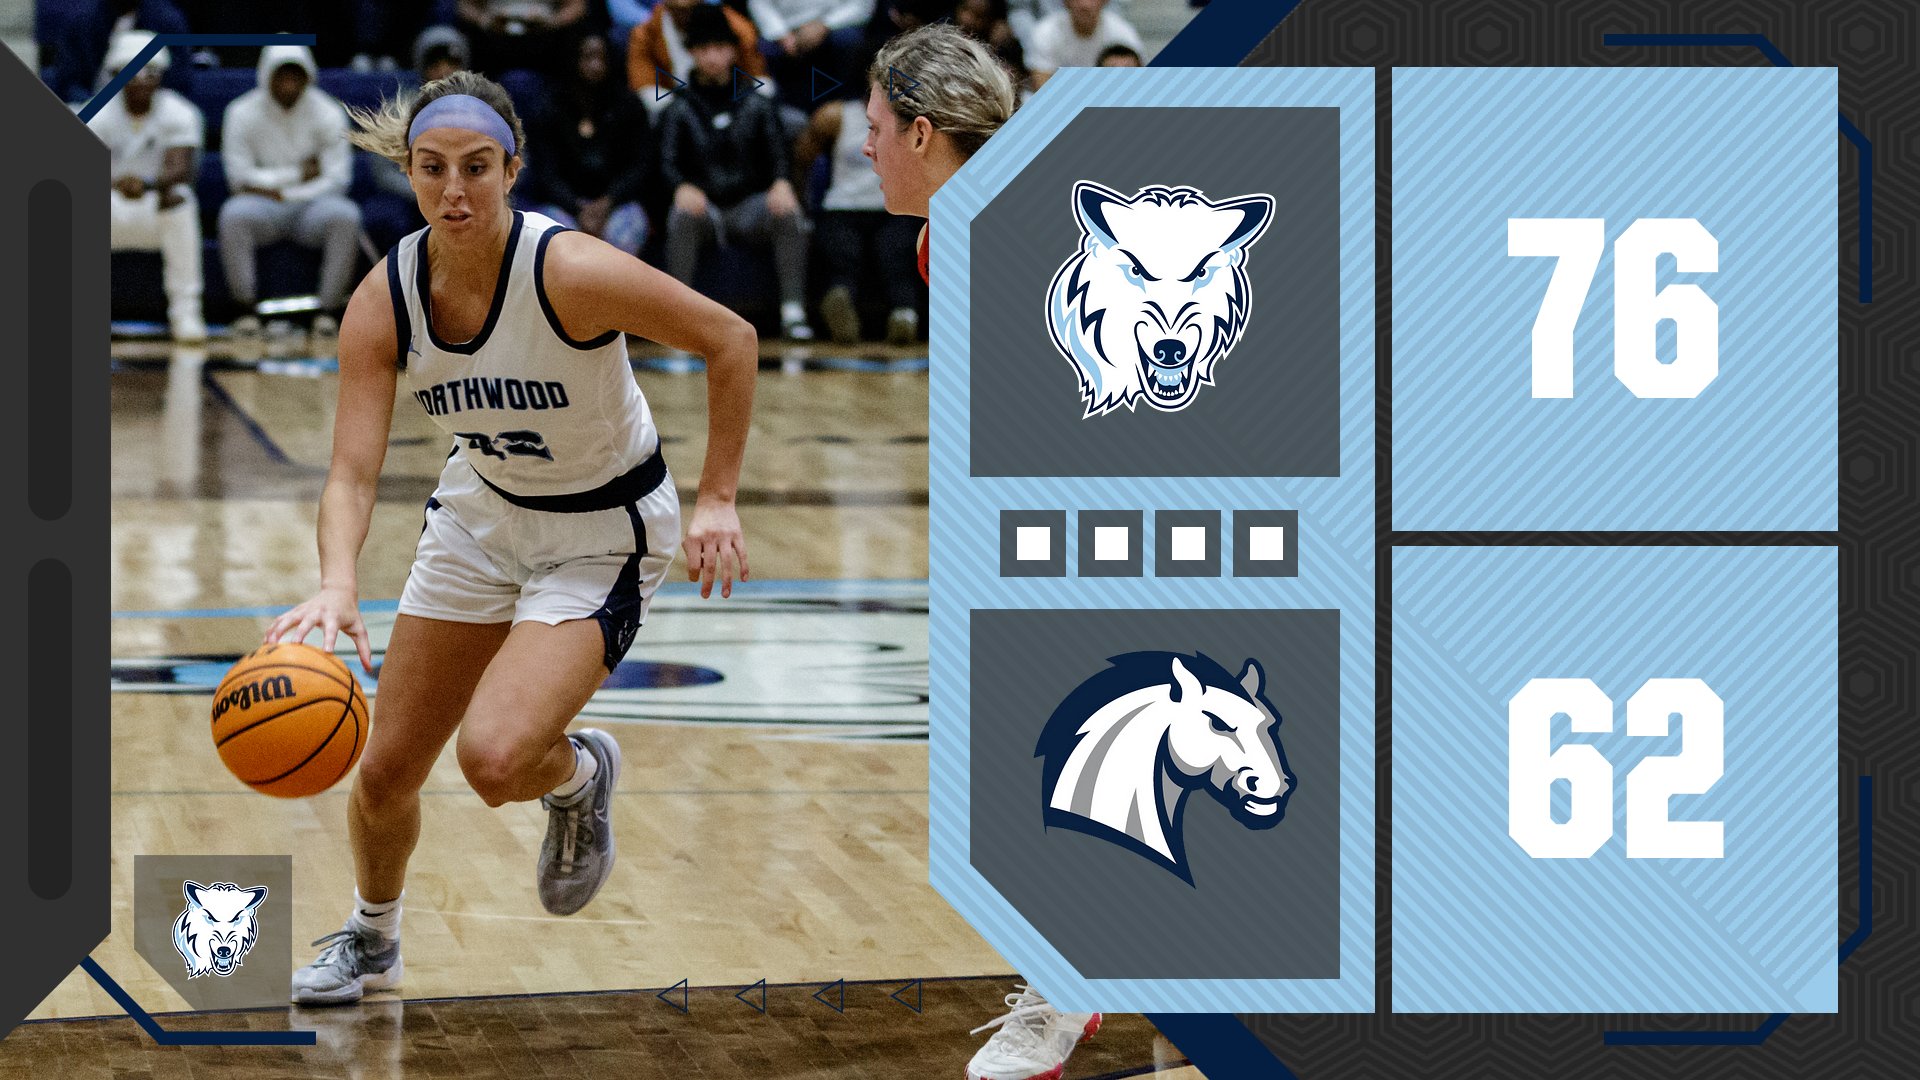 Women's Basketball Tabs 76-62 WIn Over Hillsdale In Midland